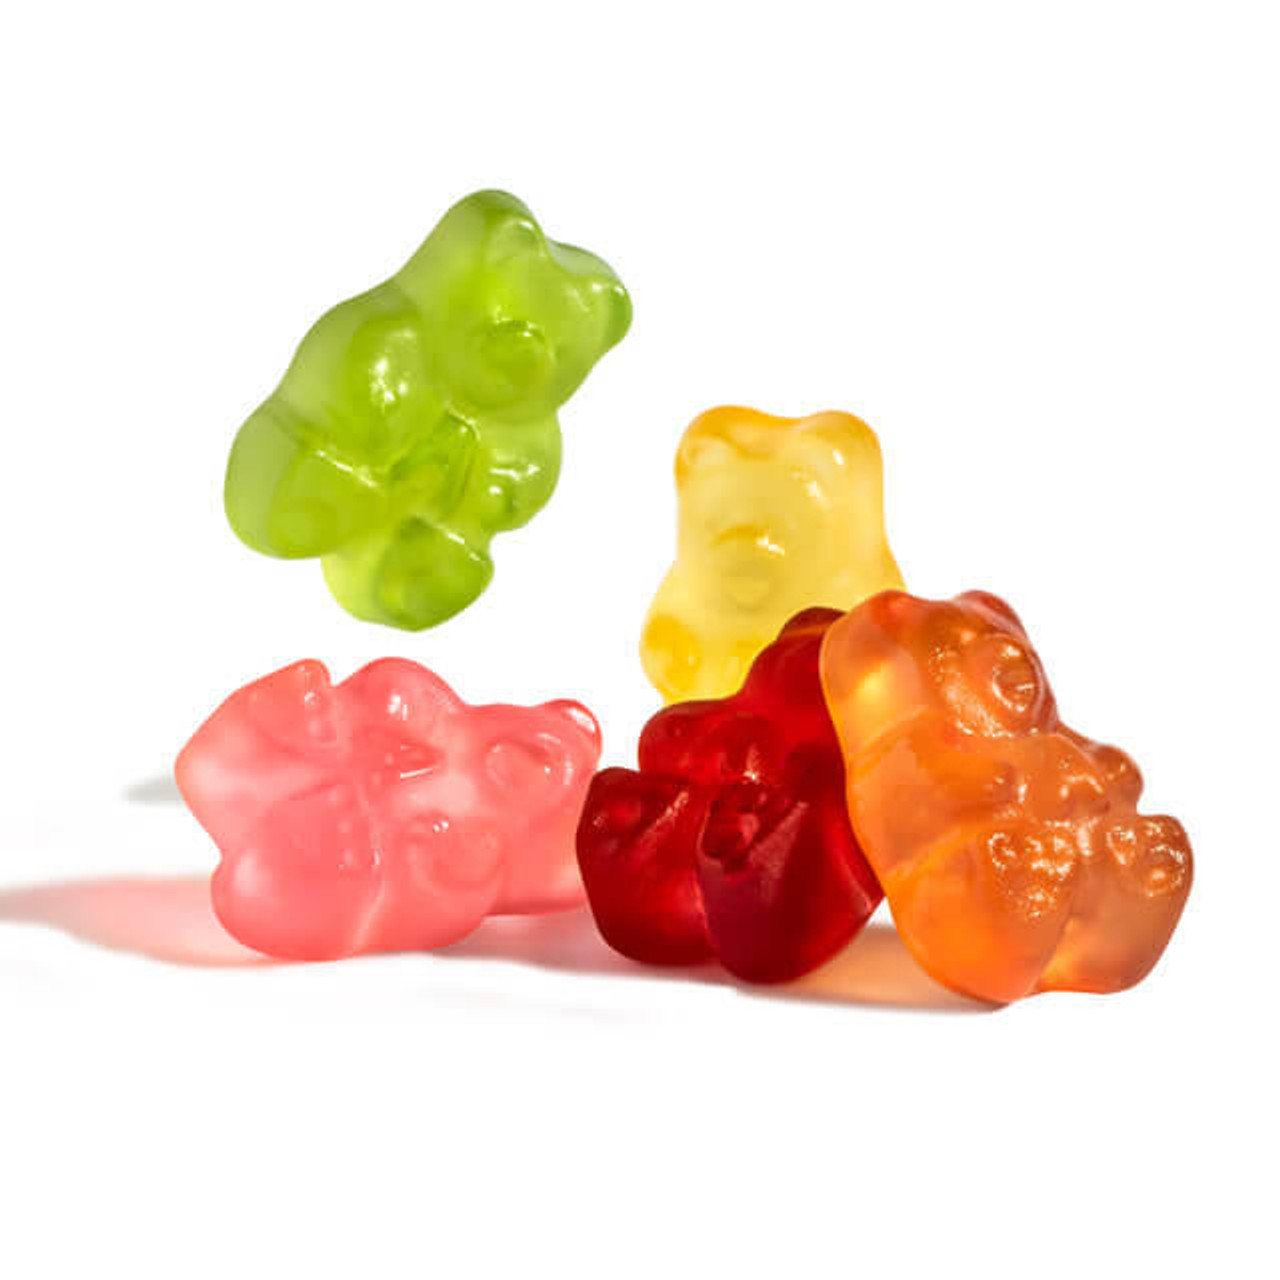  Albanese 5 Natural Flavor Gummi Bears 5 lb. - 4/Case | Brightly Colored Bears 